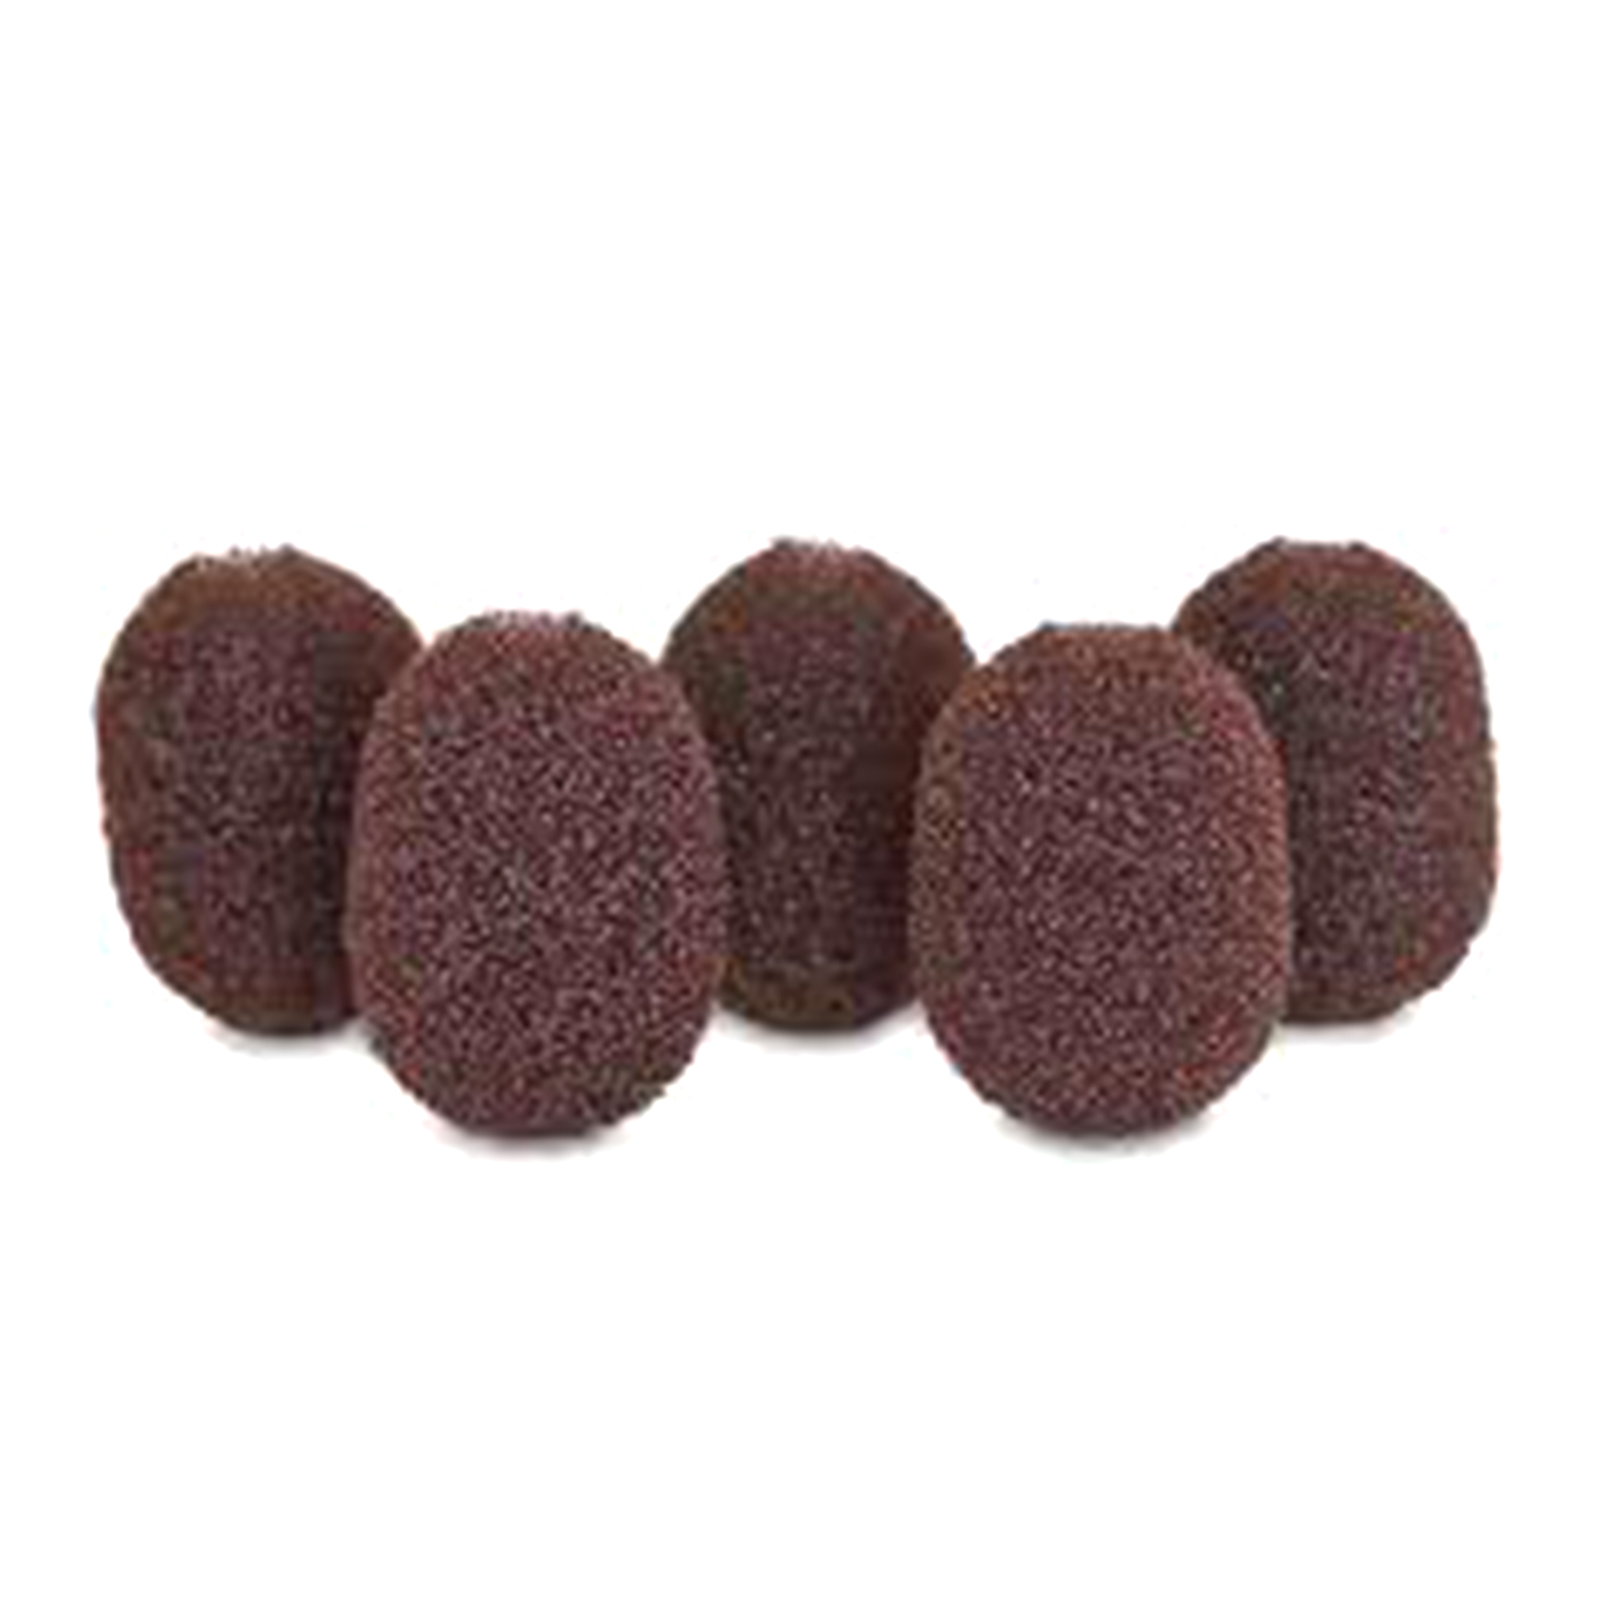 Image of Rycote Lavalier Foams Brown 10 packs of 5